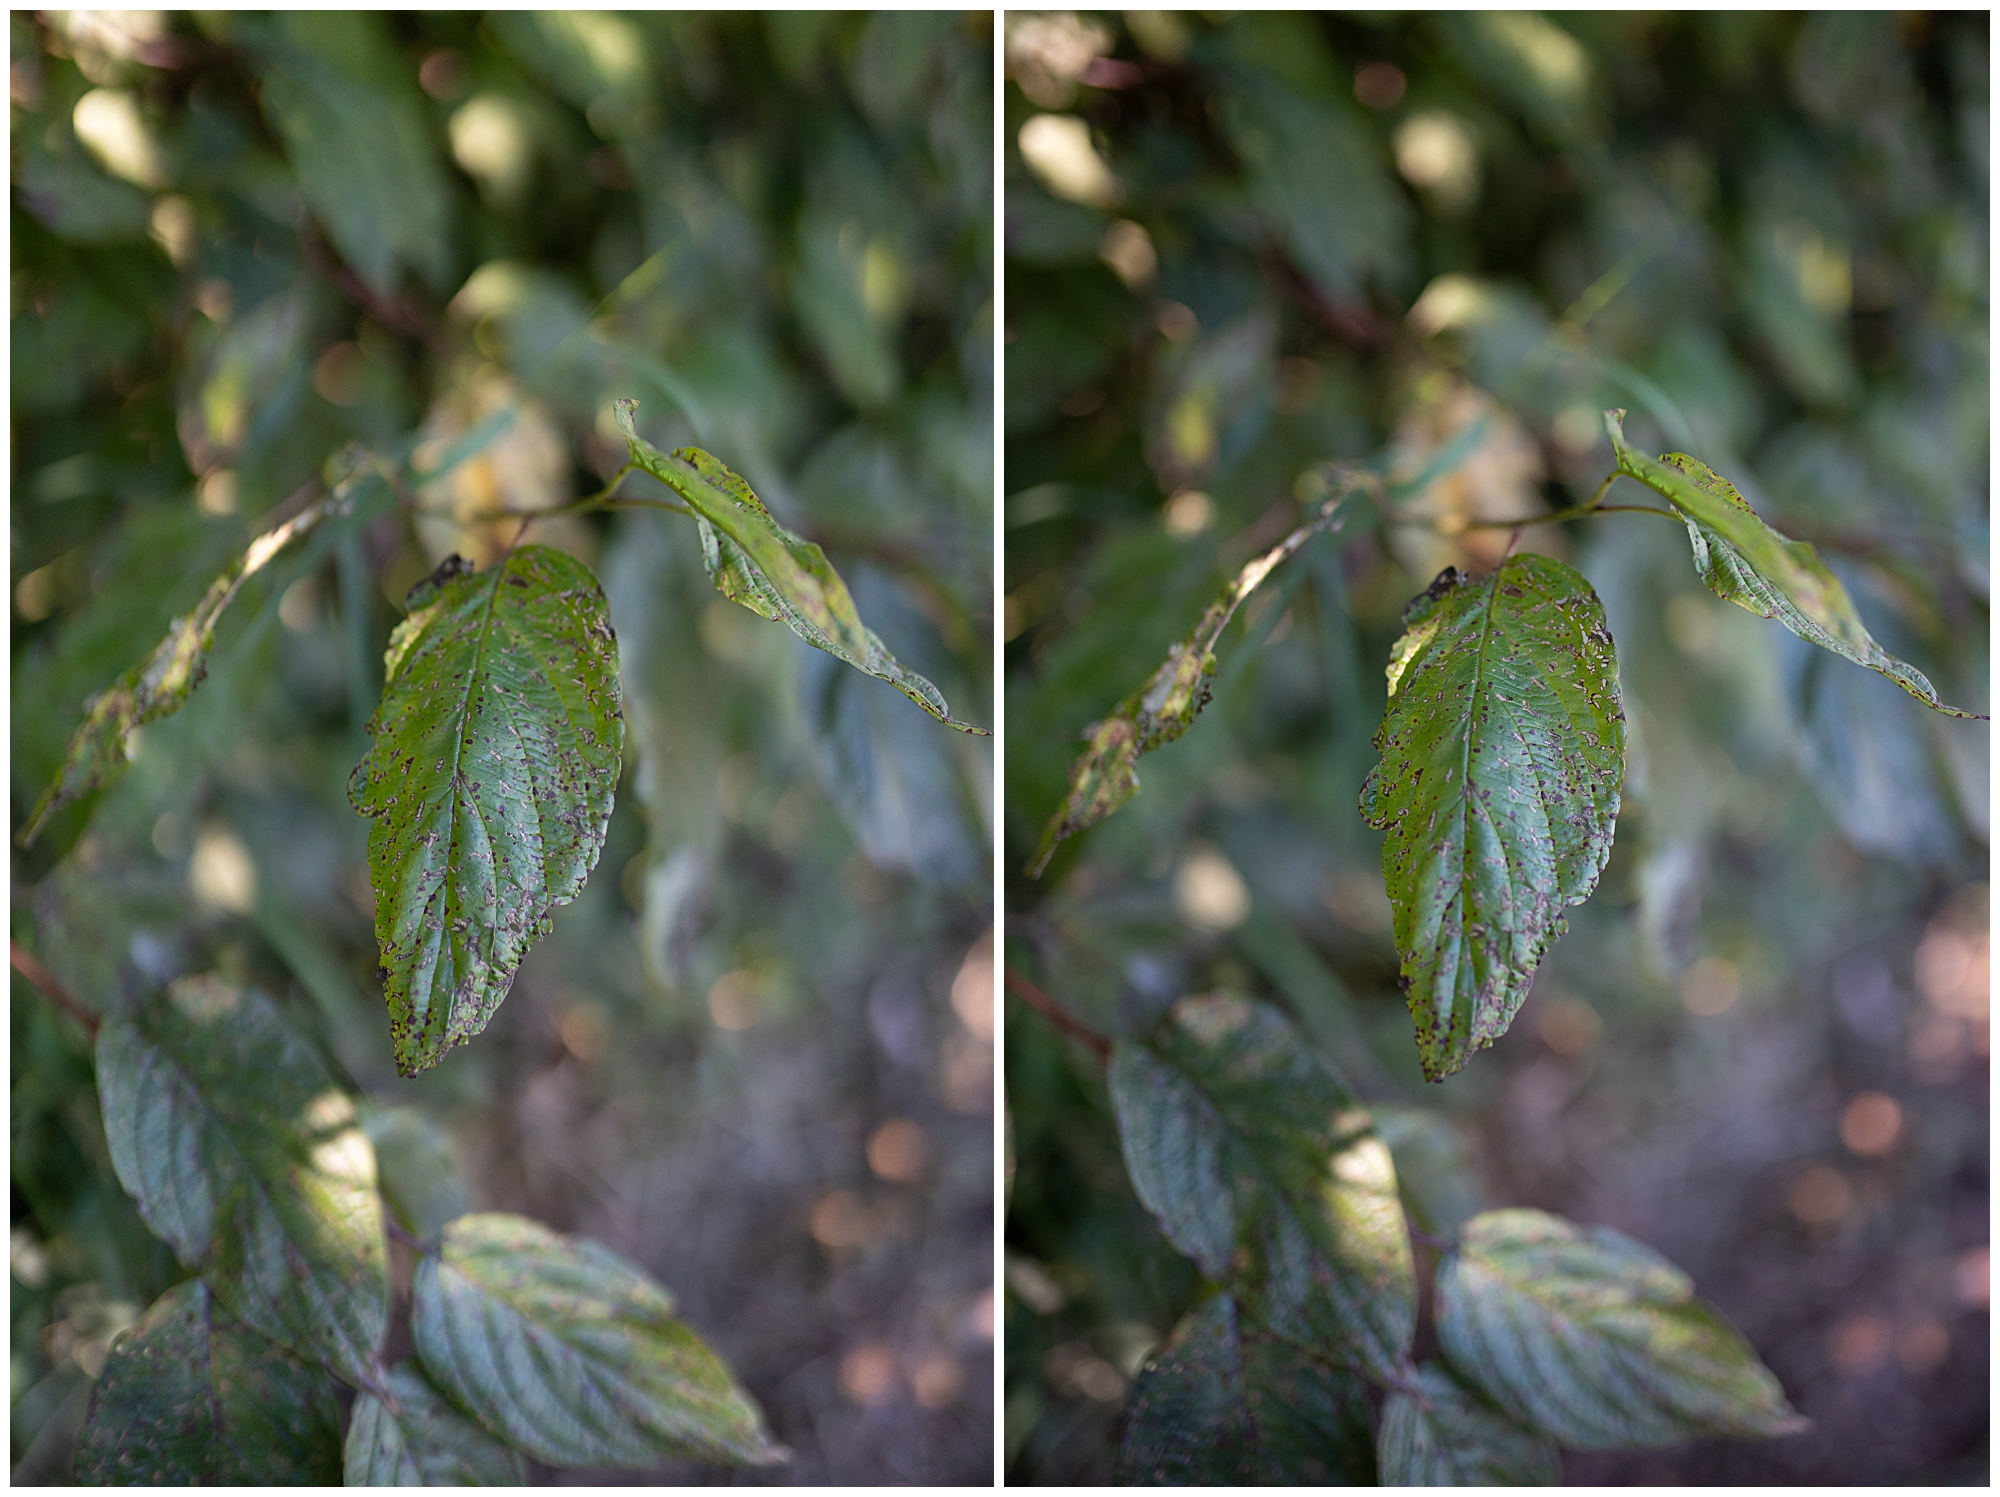 a7iii vs D750 comparison image of two leaves